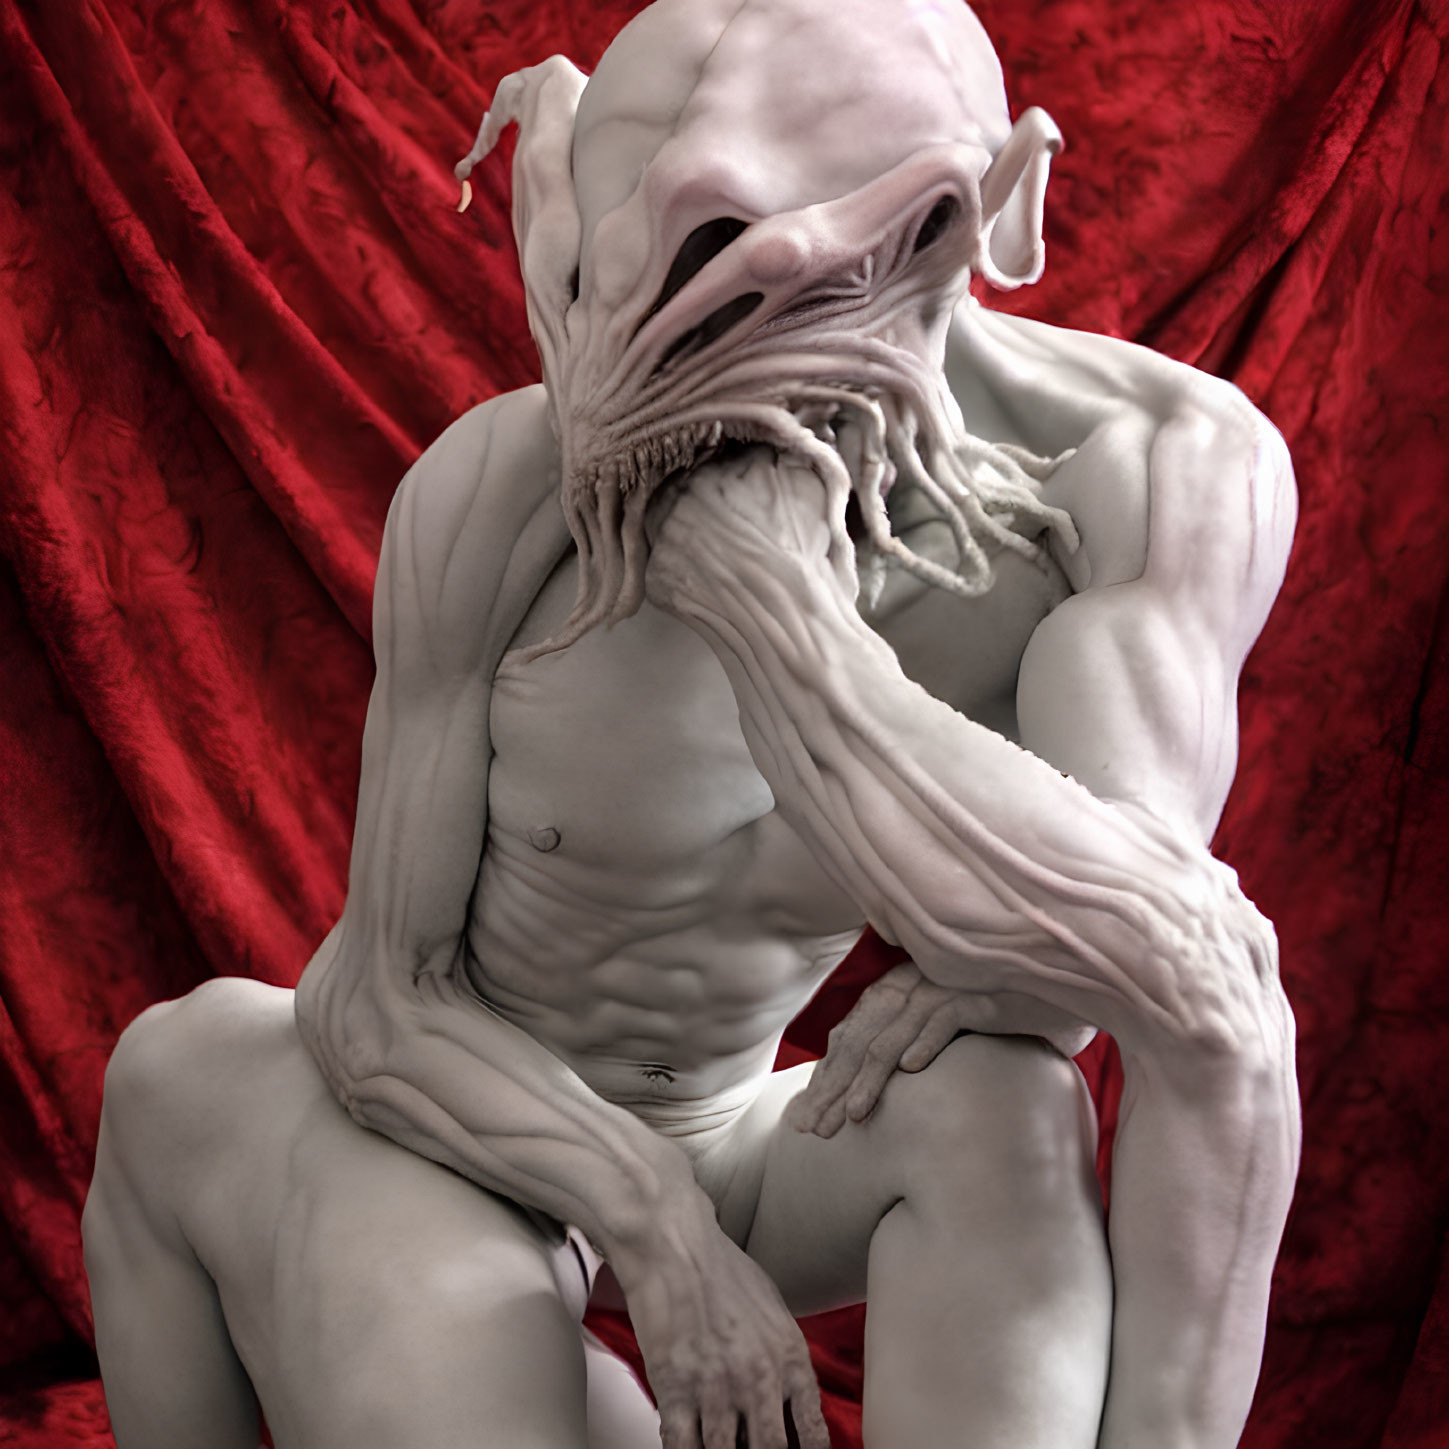 Pale-skinned muscular creature with elongated head and tentacle-like mouth appendages against red backdrop